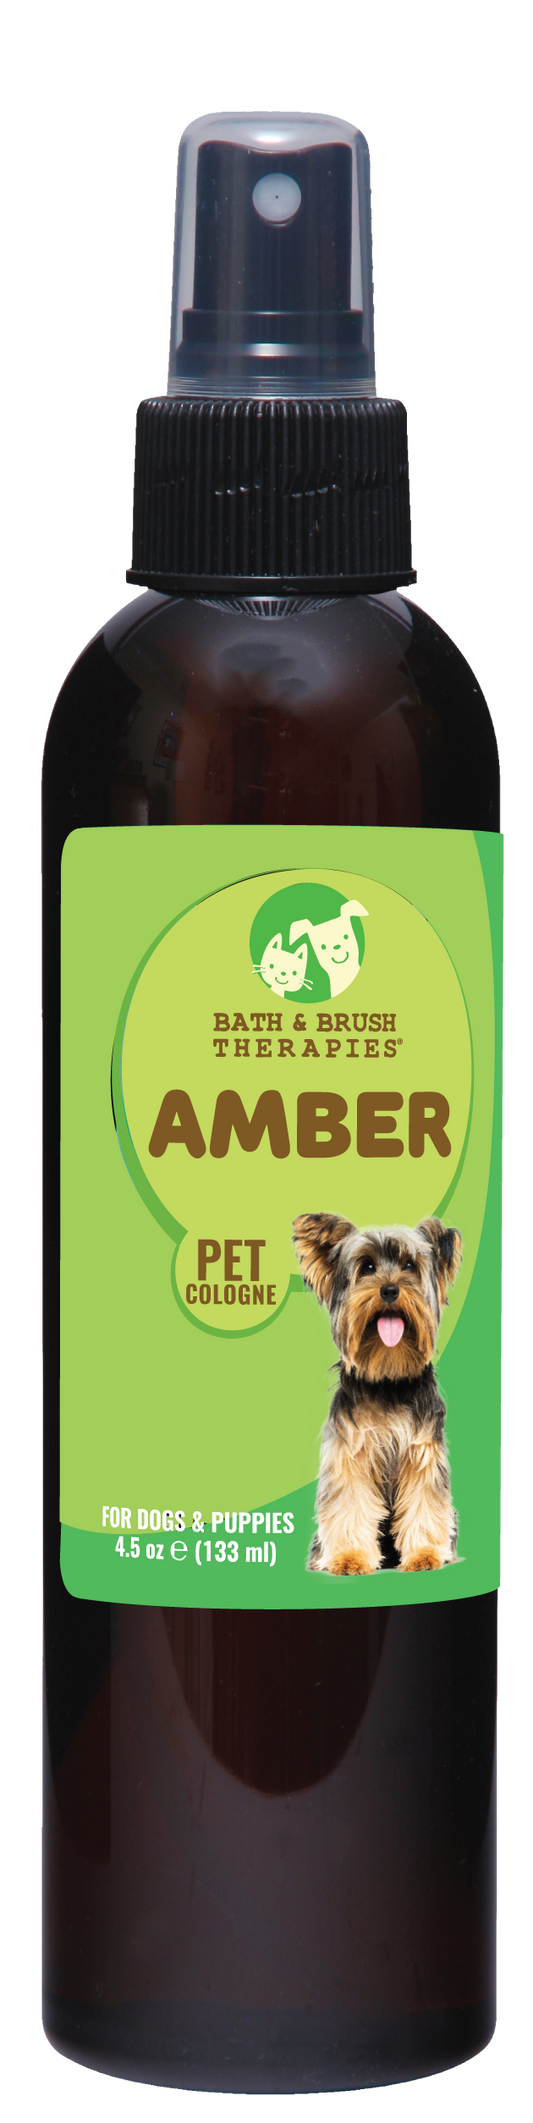 Amber Pet Cologne | Bath & Brush Therapies®